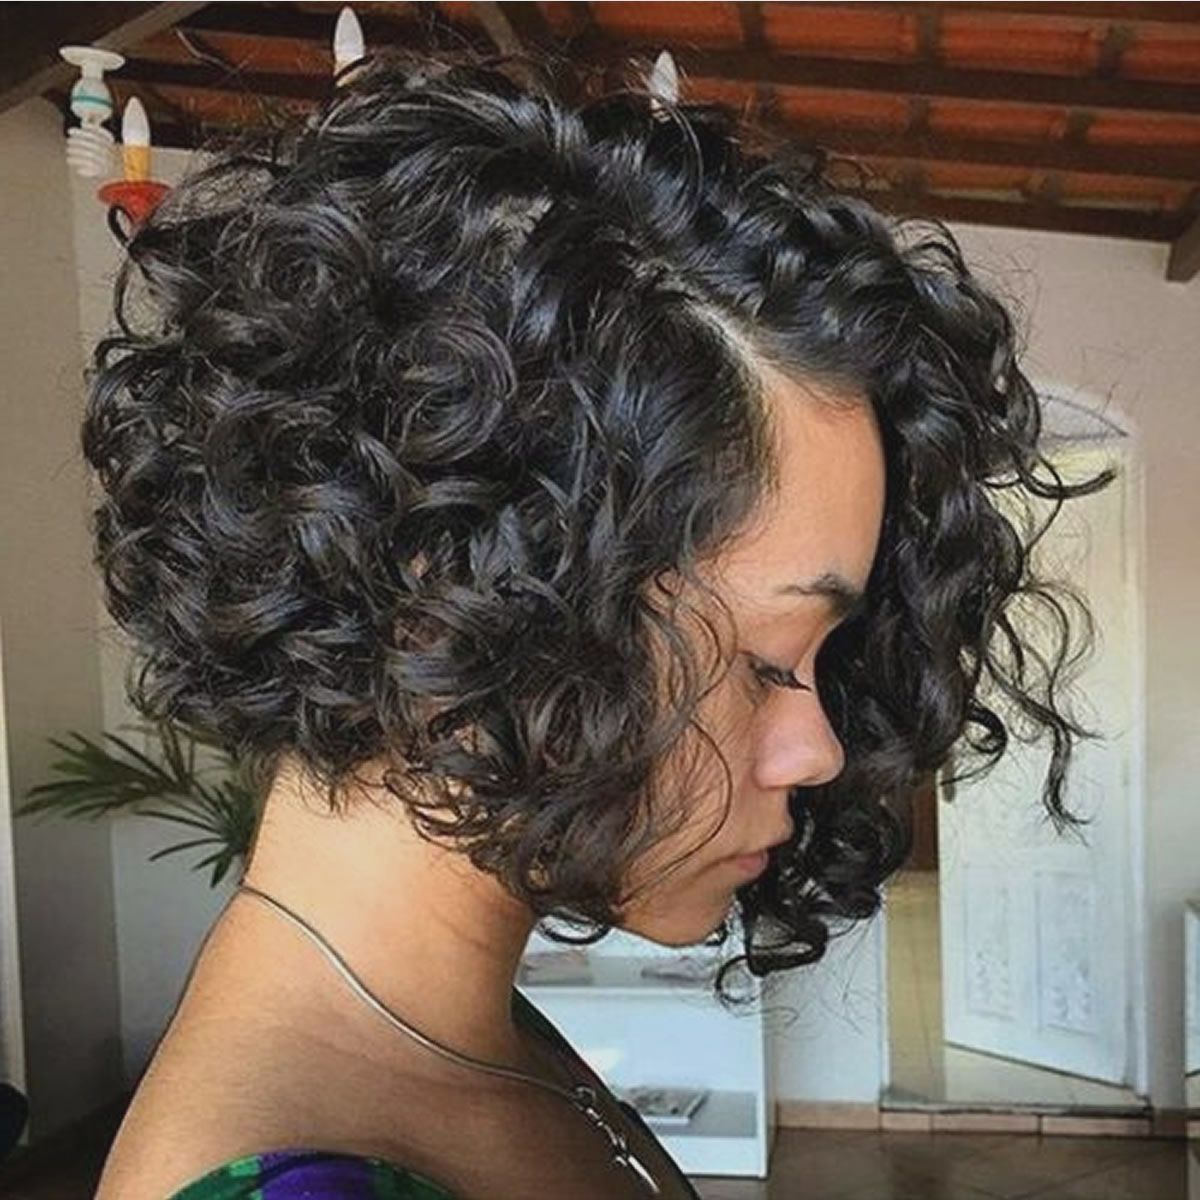 Black Hairstyles : Curly Bob Hairstyles For Black Women Curly Angled Intended For Curly Angled Bob Hairstyles (View 18 of 20)